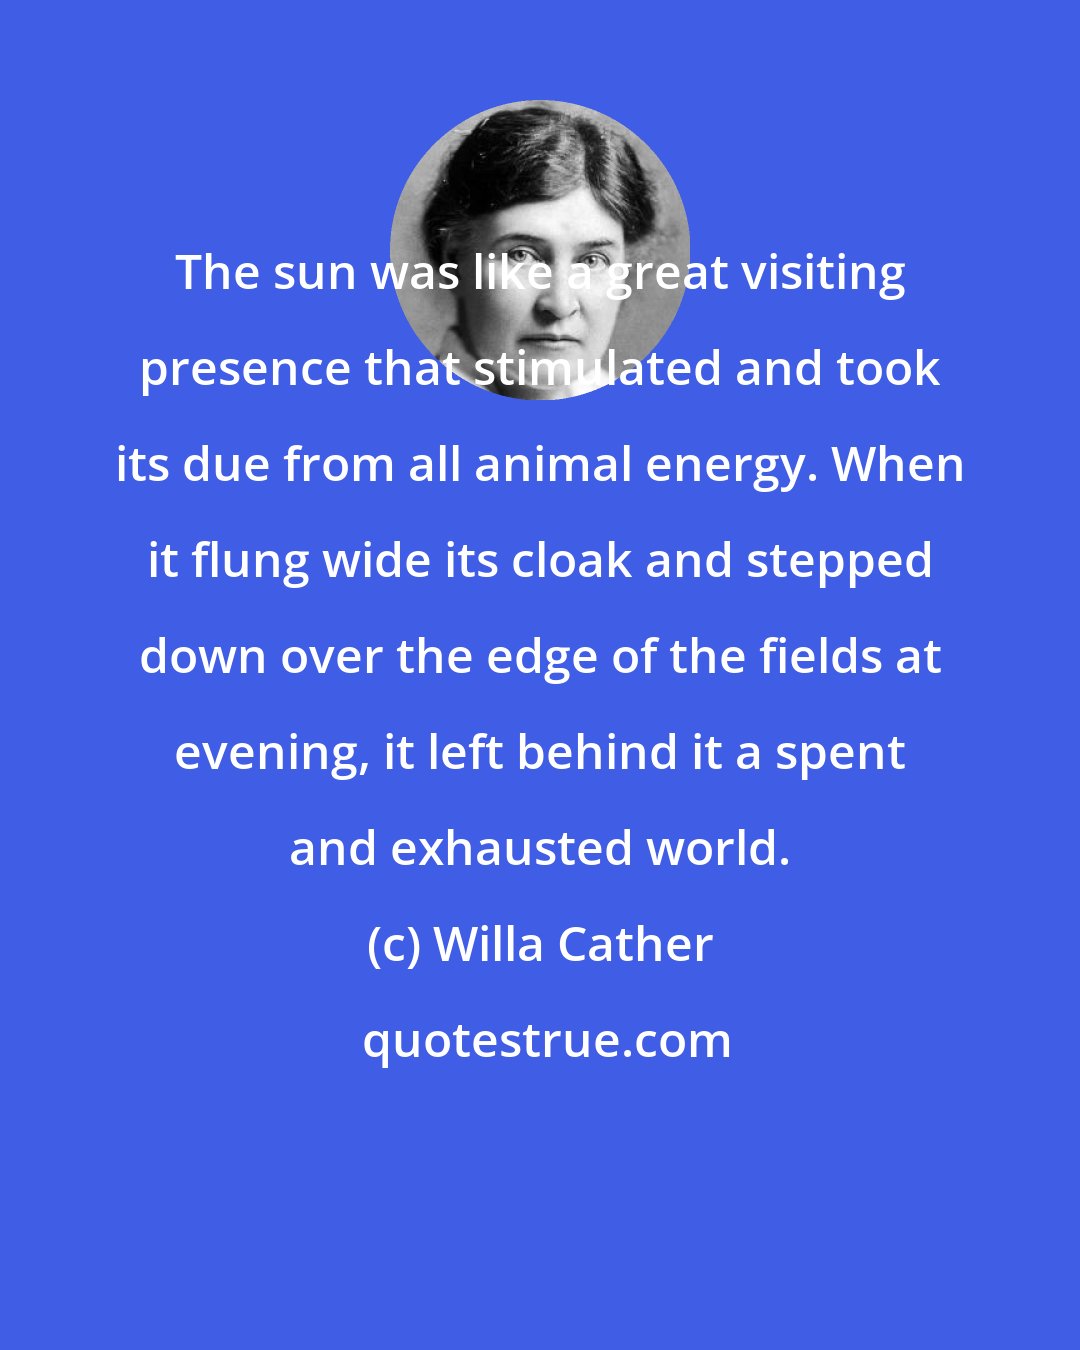 Willa Cather: The sun was like a great visiting presence that stimulated and took its due from all animal energy. When it flung wide its cloak and stepped down over the edge of the fields at evening, it left behind it a spent and exhausted world.